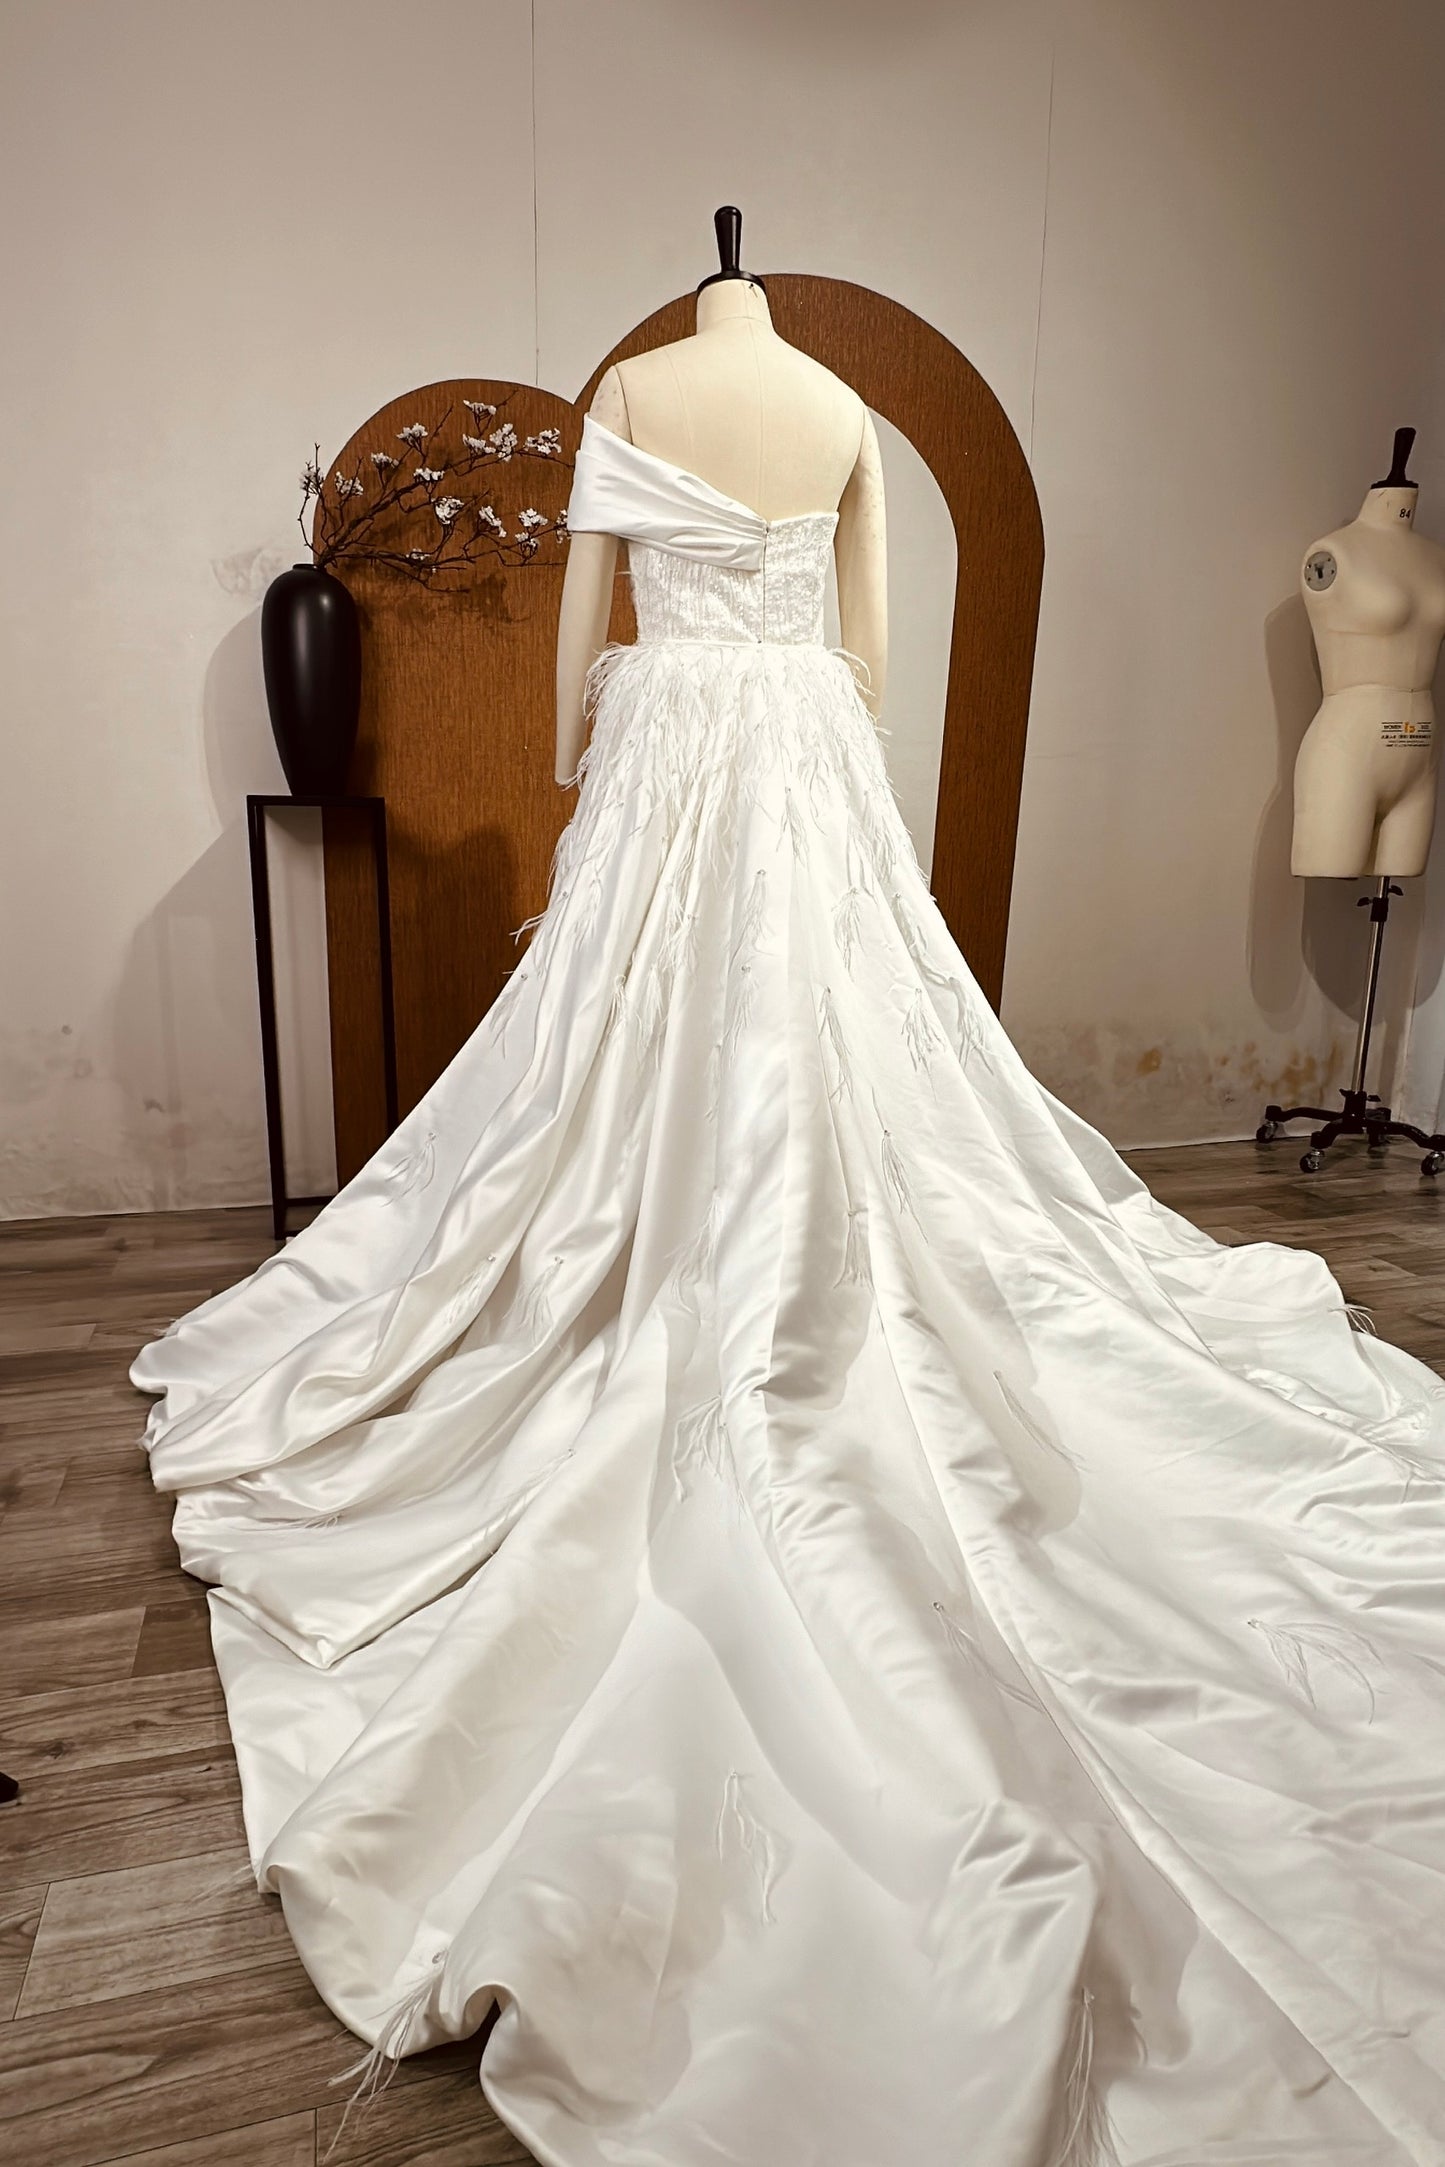 Rose - Elegant and Customizable 2-in-1 Mermaid Wedding Dress - Tailored to the Bride's Desires